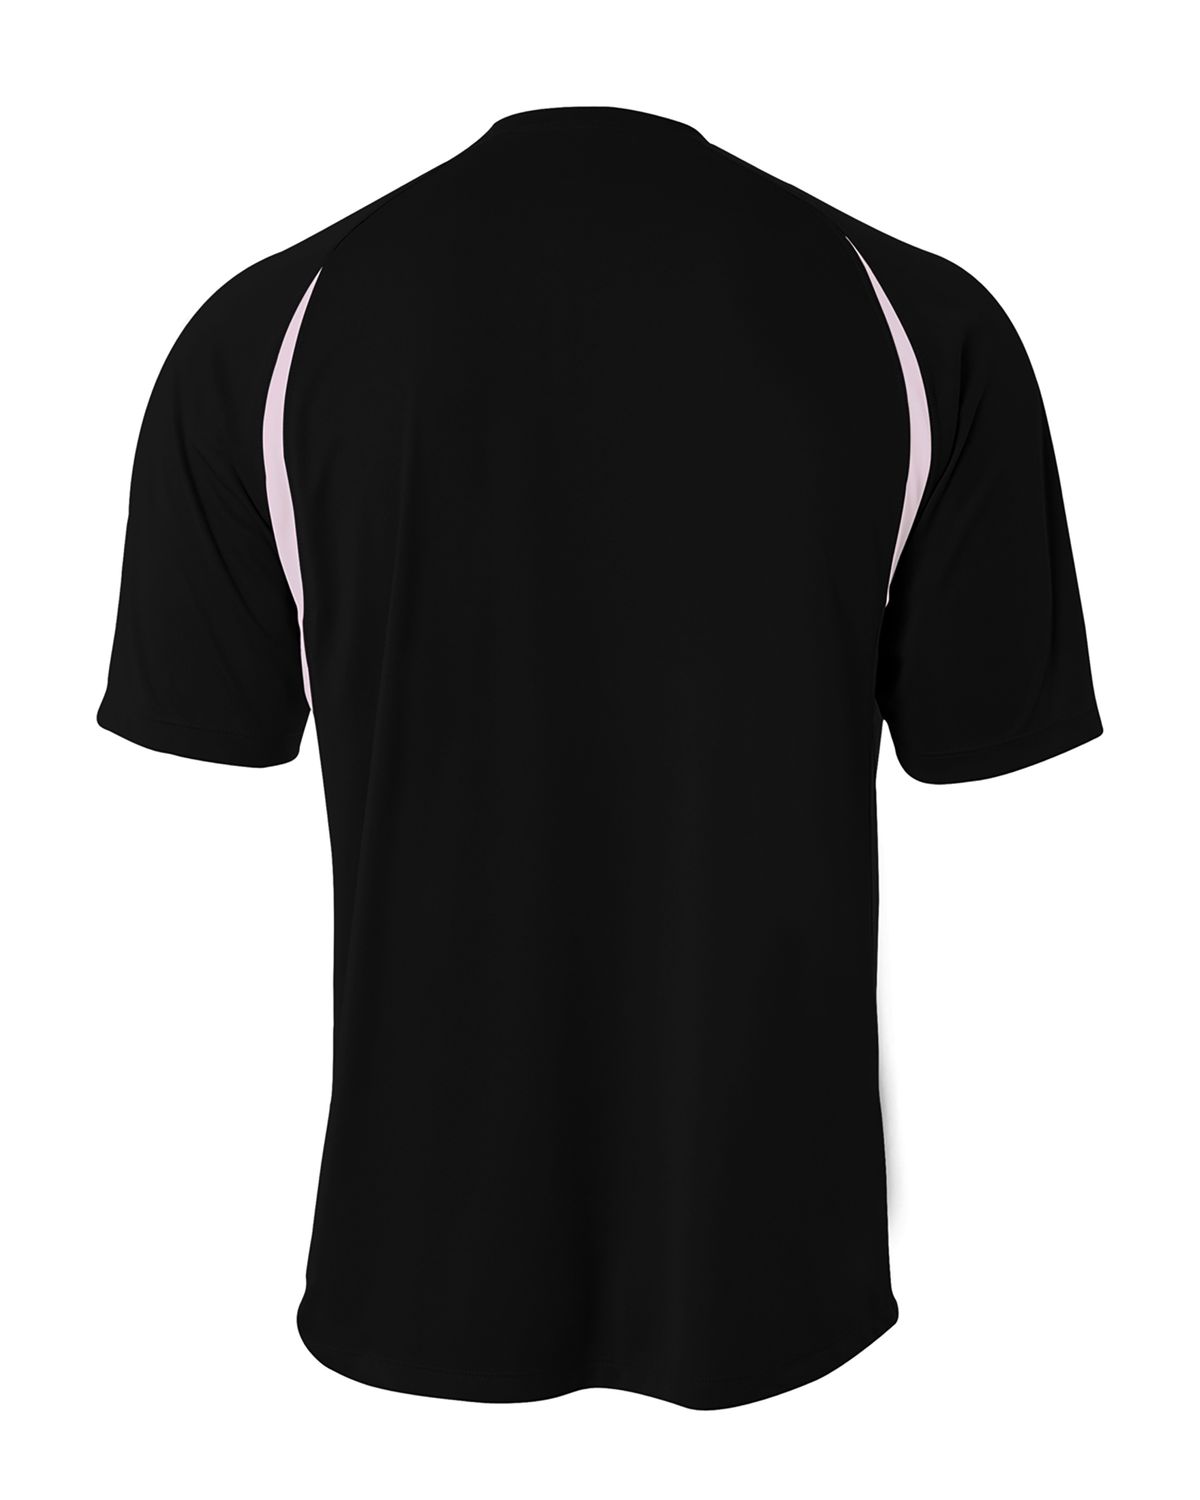 'A4 N3181 Men's Cooling Performance Color Blocked T-Shirt'